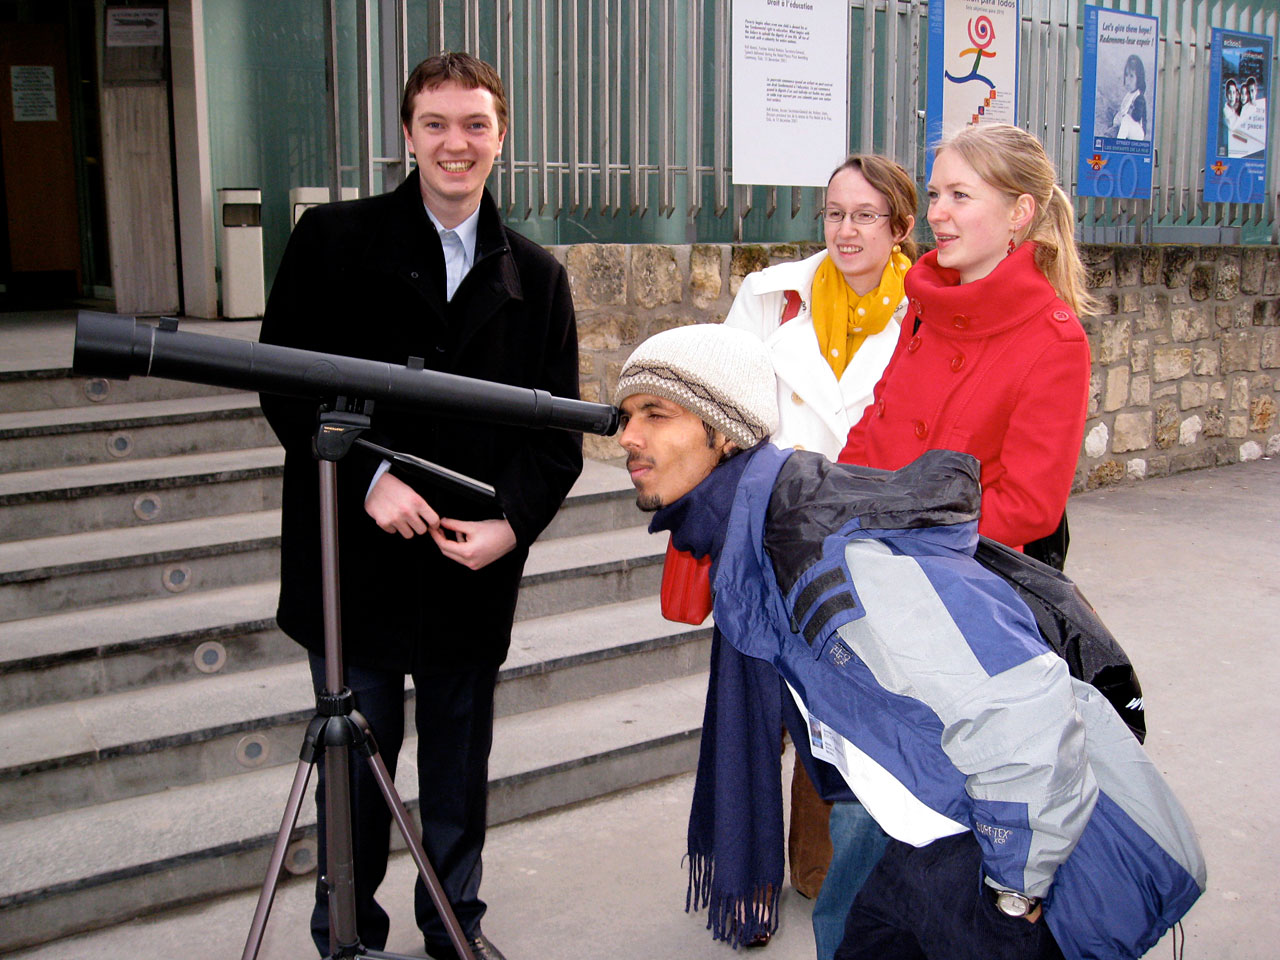 Students with the Galileoscope